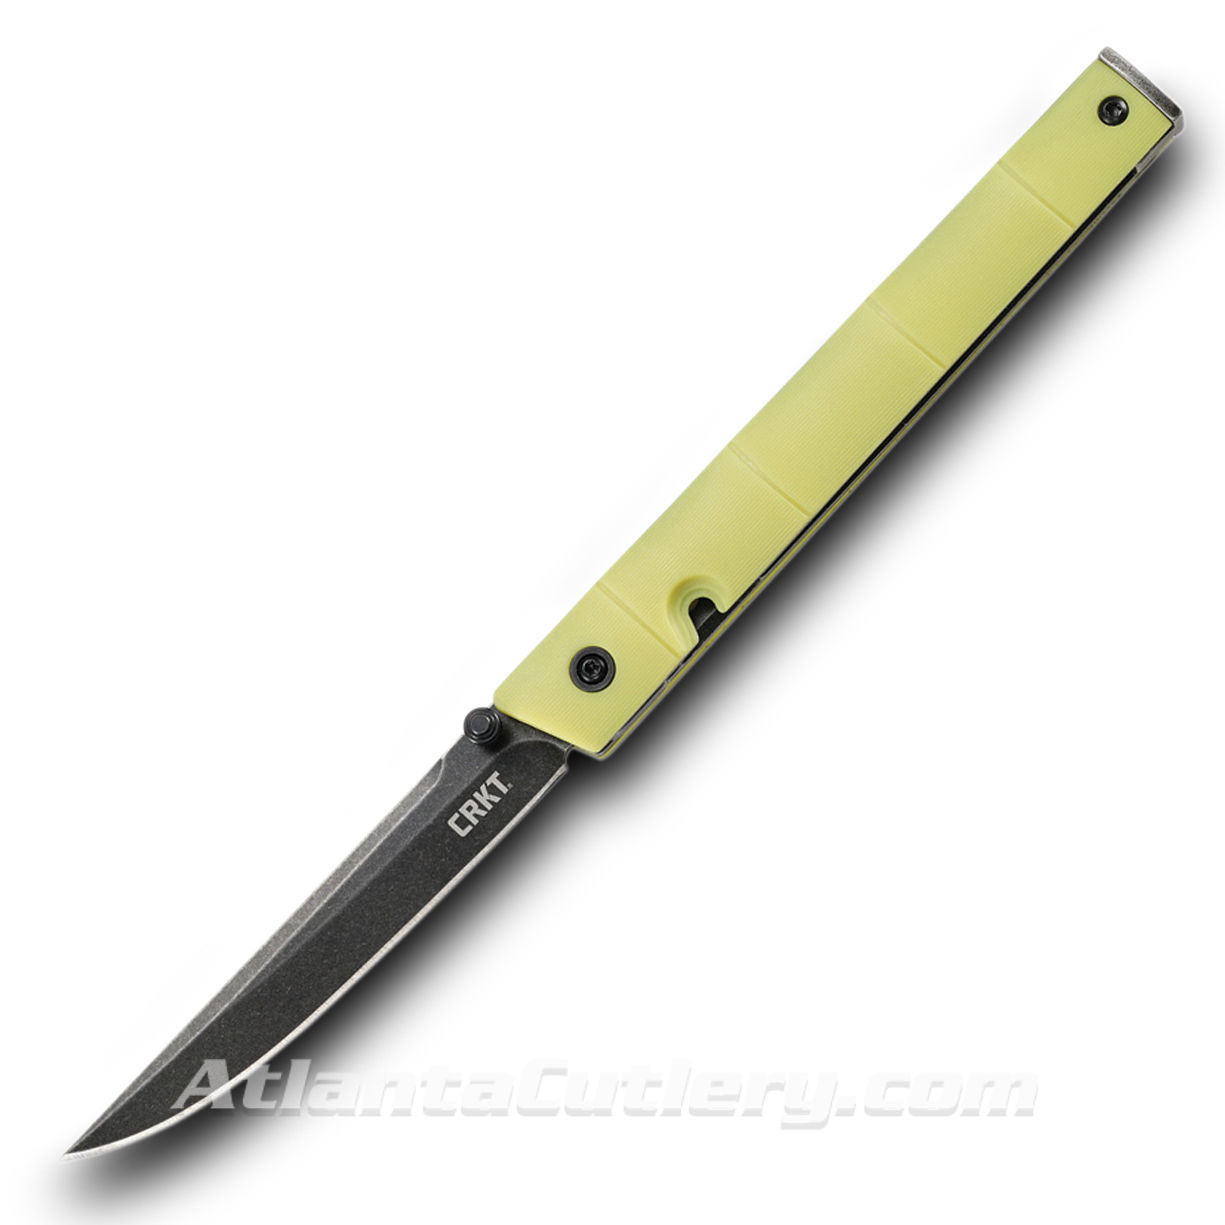 CRKT CEO Linerlock Bamboo knife poses as a pen, has a thin, sleek all-black blade, ball bearing pivot for quick opening